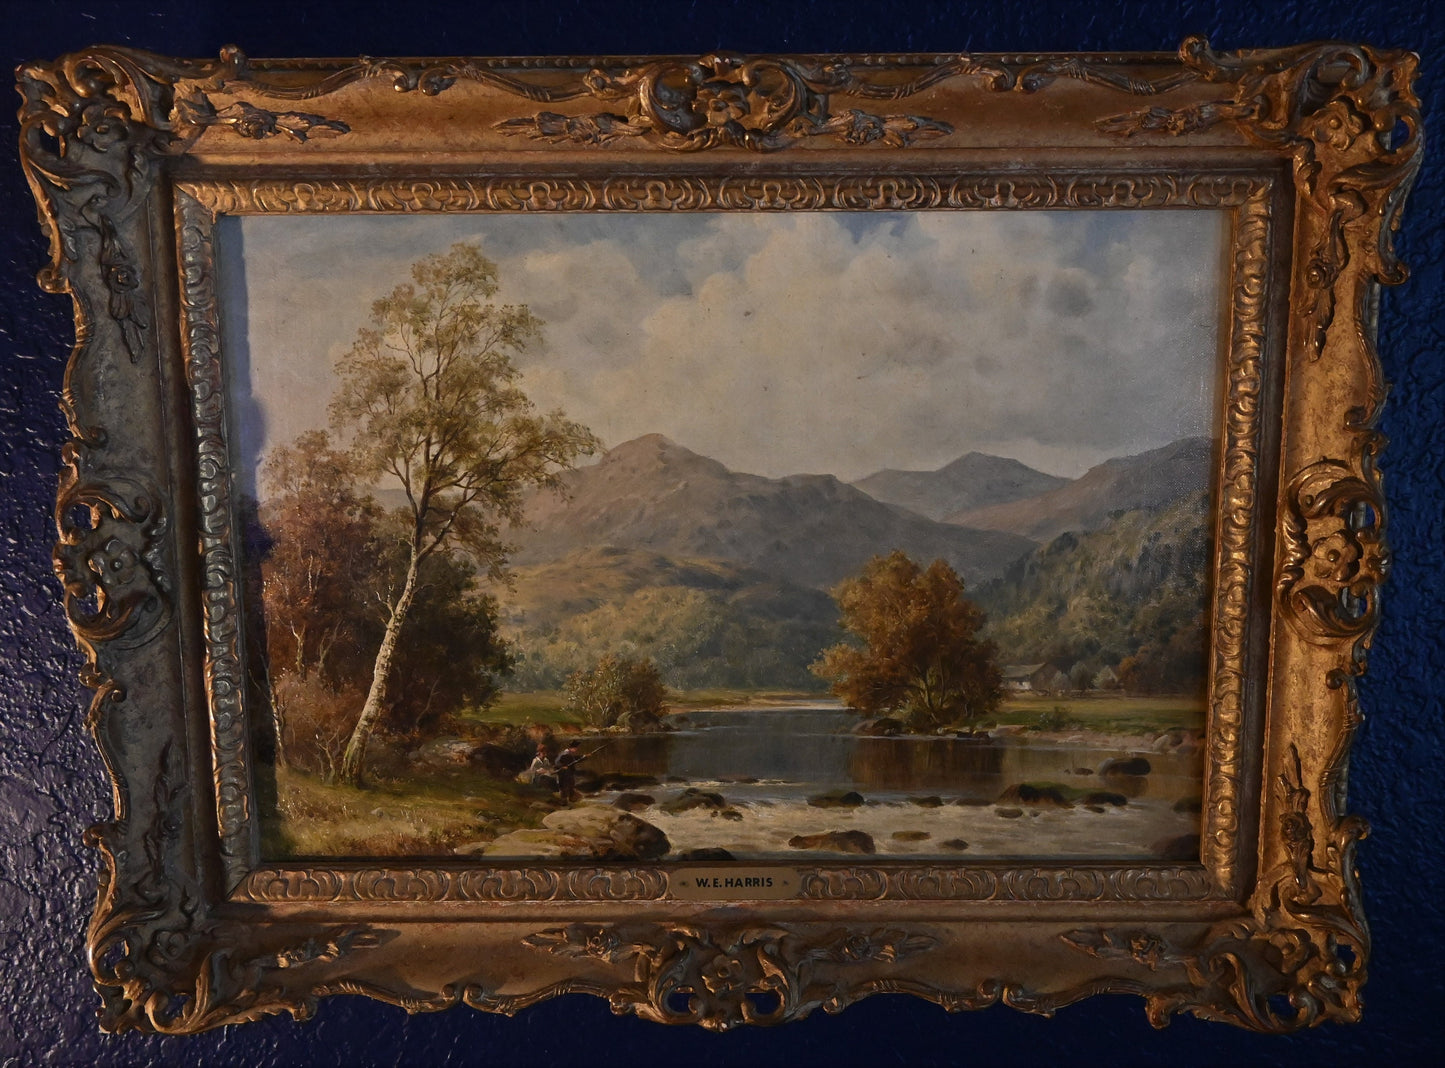 William E. Harris (England 1860 - 1930) Original Oil - 18"H x 24"W- "In The Mawddach Valley" Well listed -High auction & galley prices!